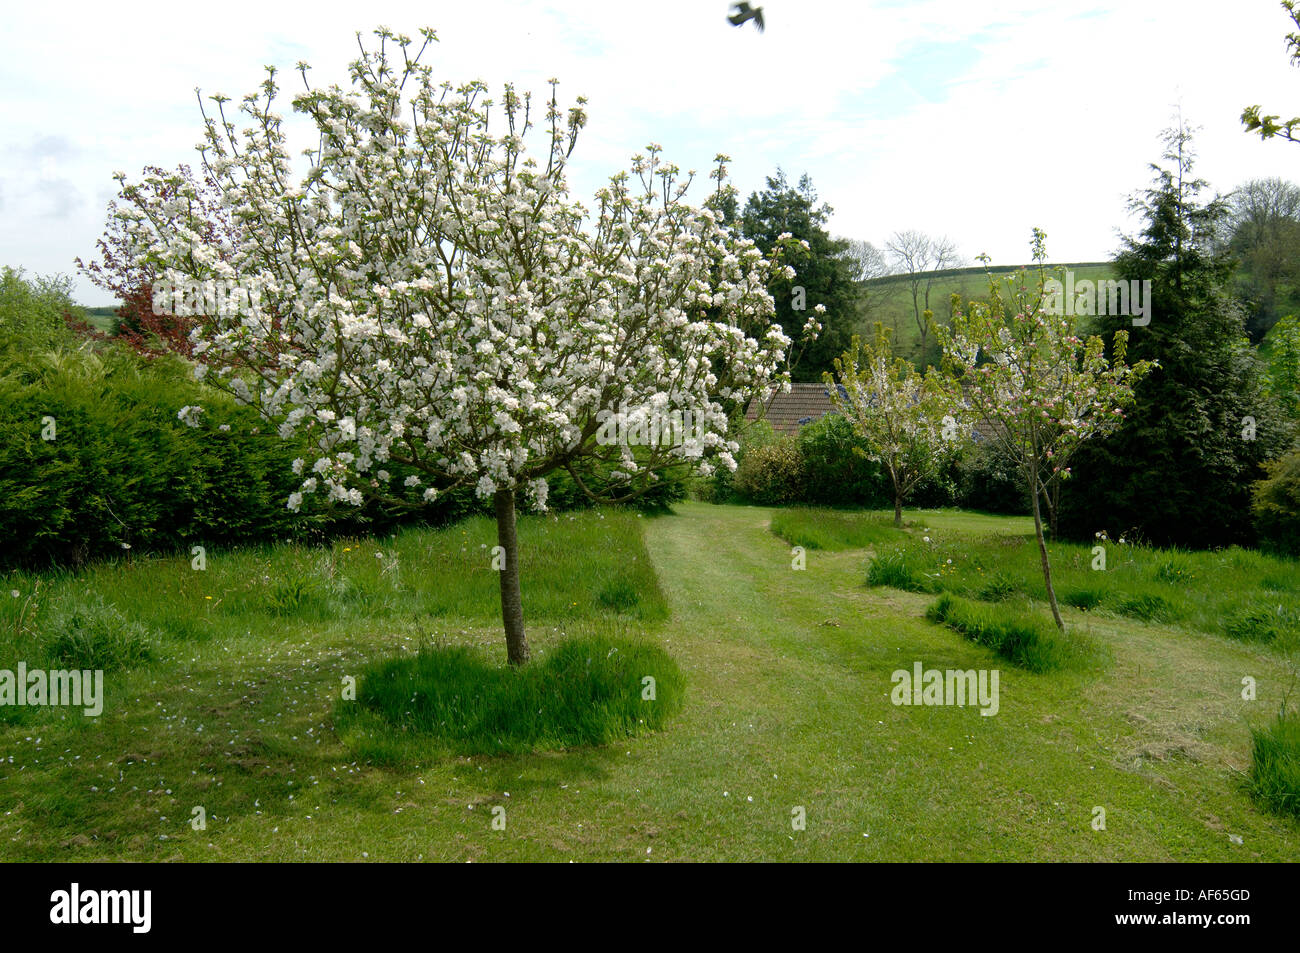 Discovery apple tree in full bloom tall grass lawns with pathways mown in a country garden Stock Photo